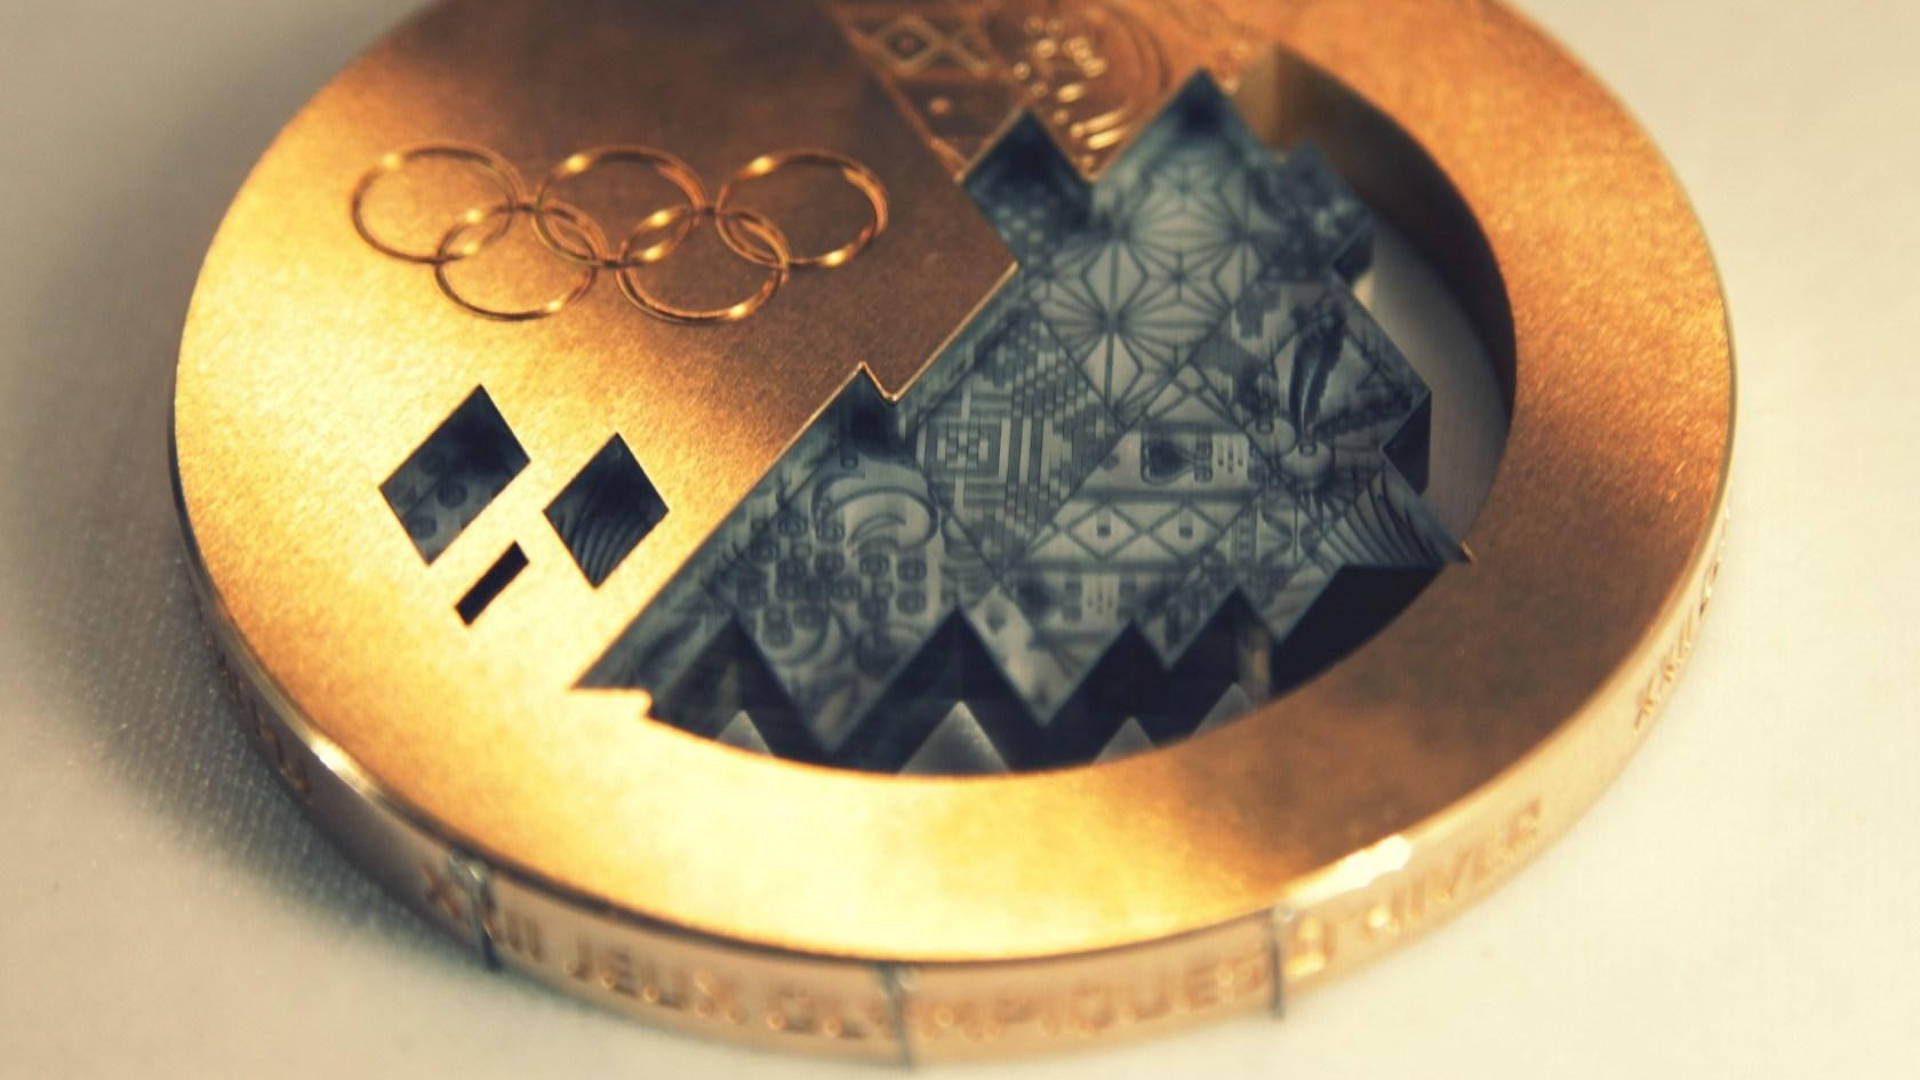 Olympics medal, Close-up view, Medals collection, Sporting excellence, 1920x1080 Full HD Desktop